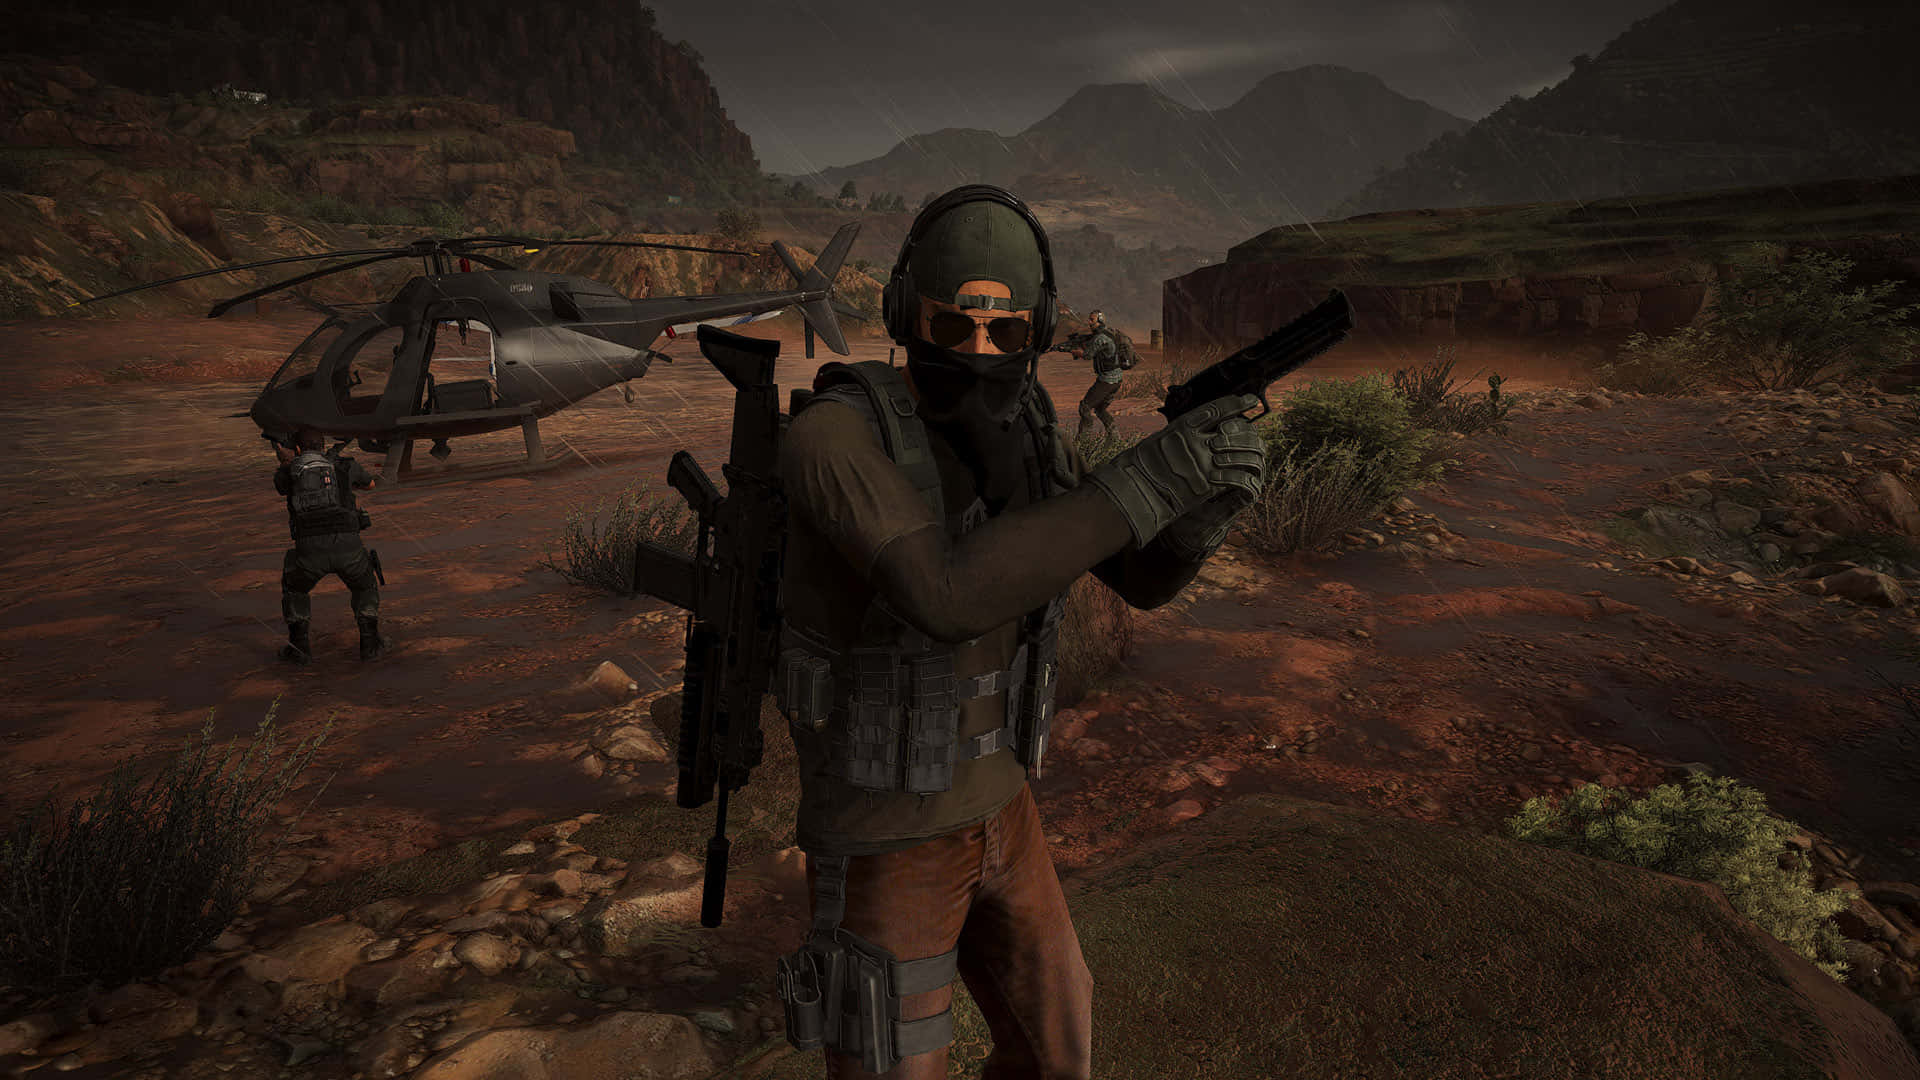 Hd Ghost Recon Wildlands Background Masked Man With A Helicopter